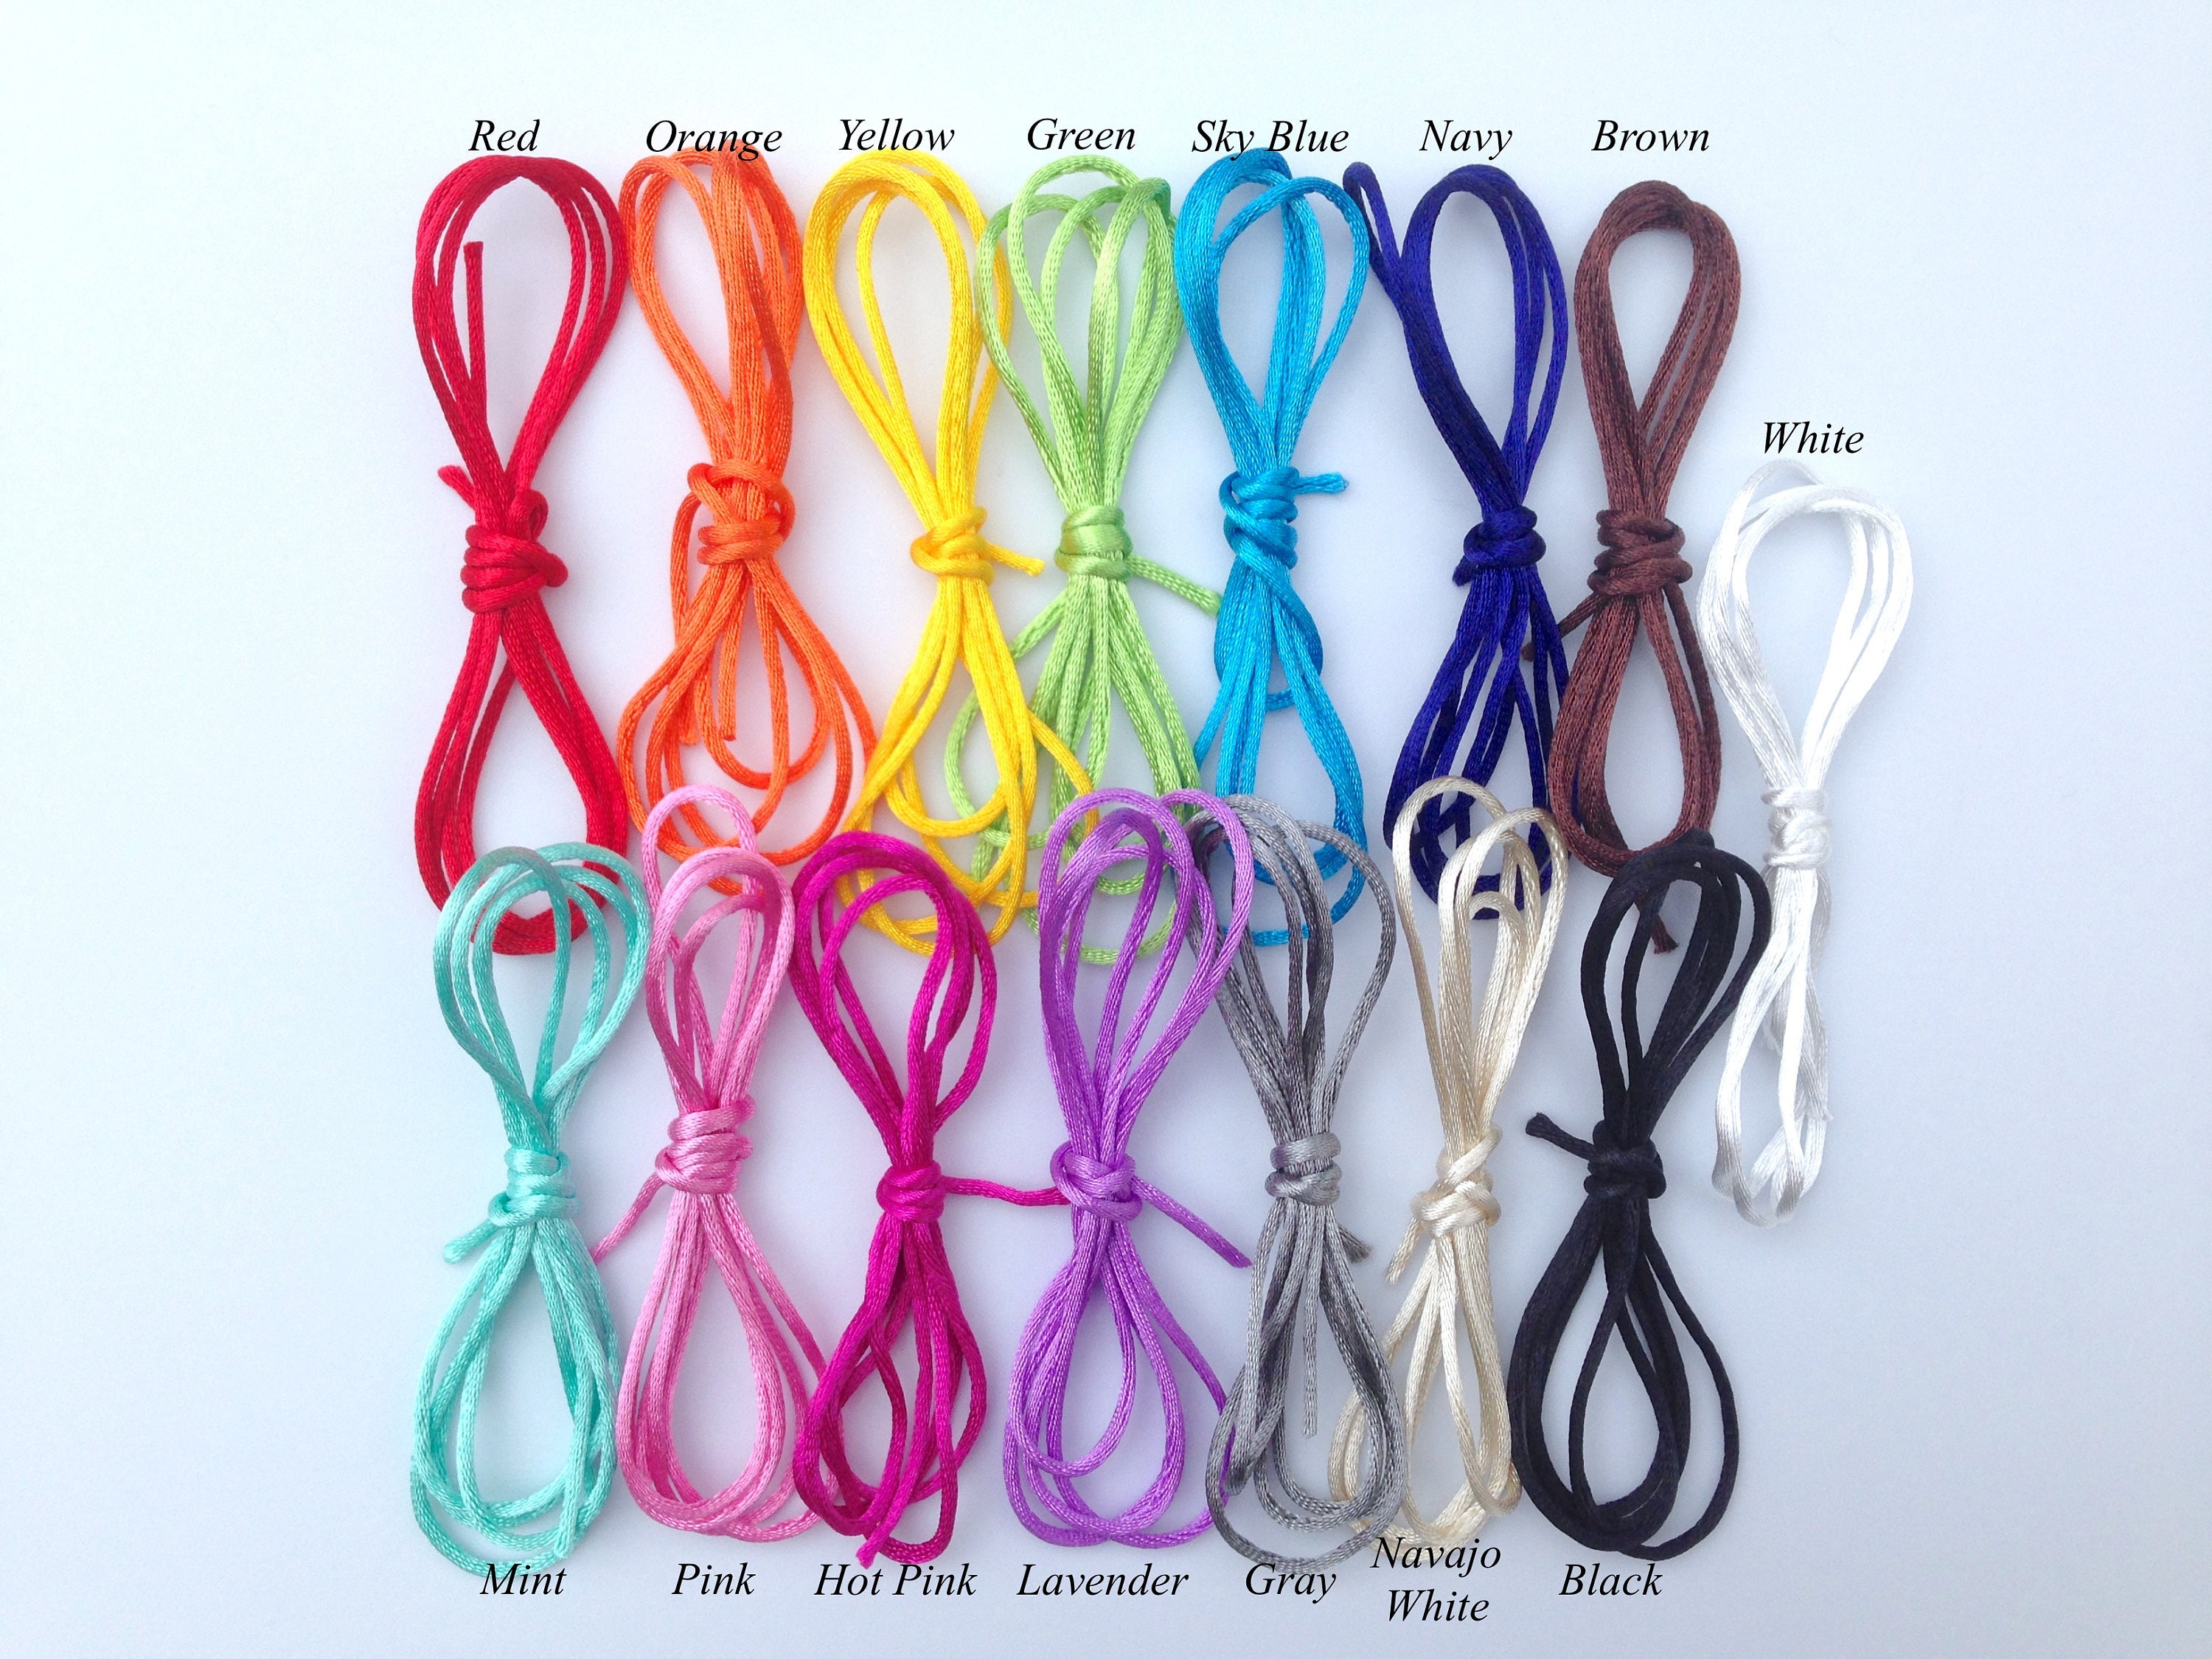 TYRY.HU MultiColor 10meter Satin Nylon Cord Solid Rope For